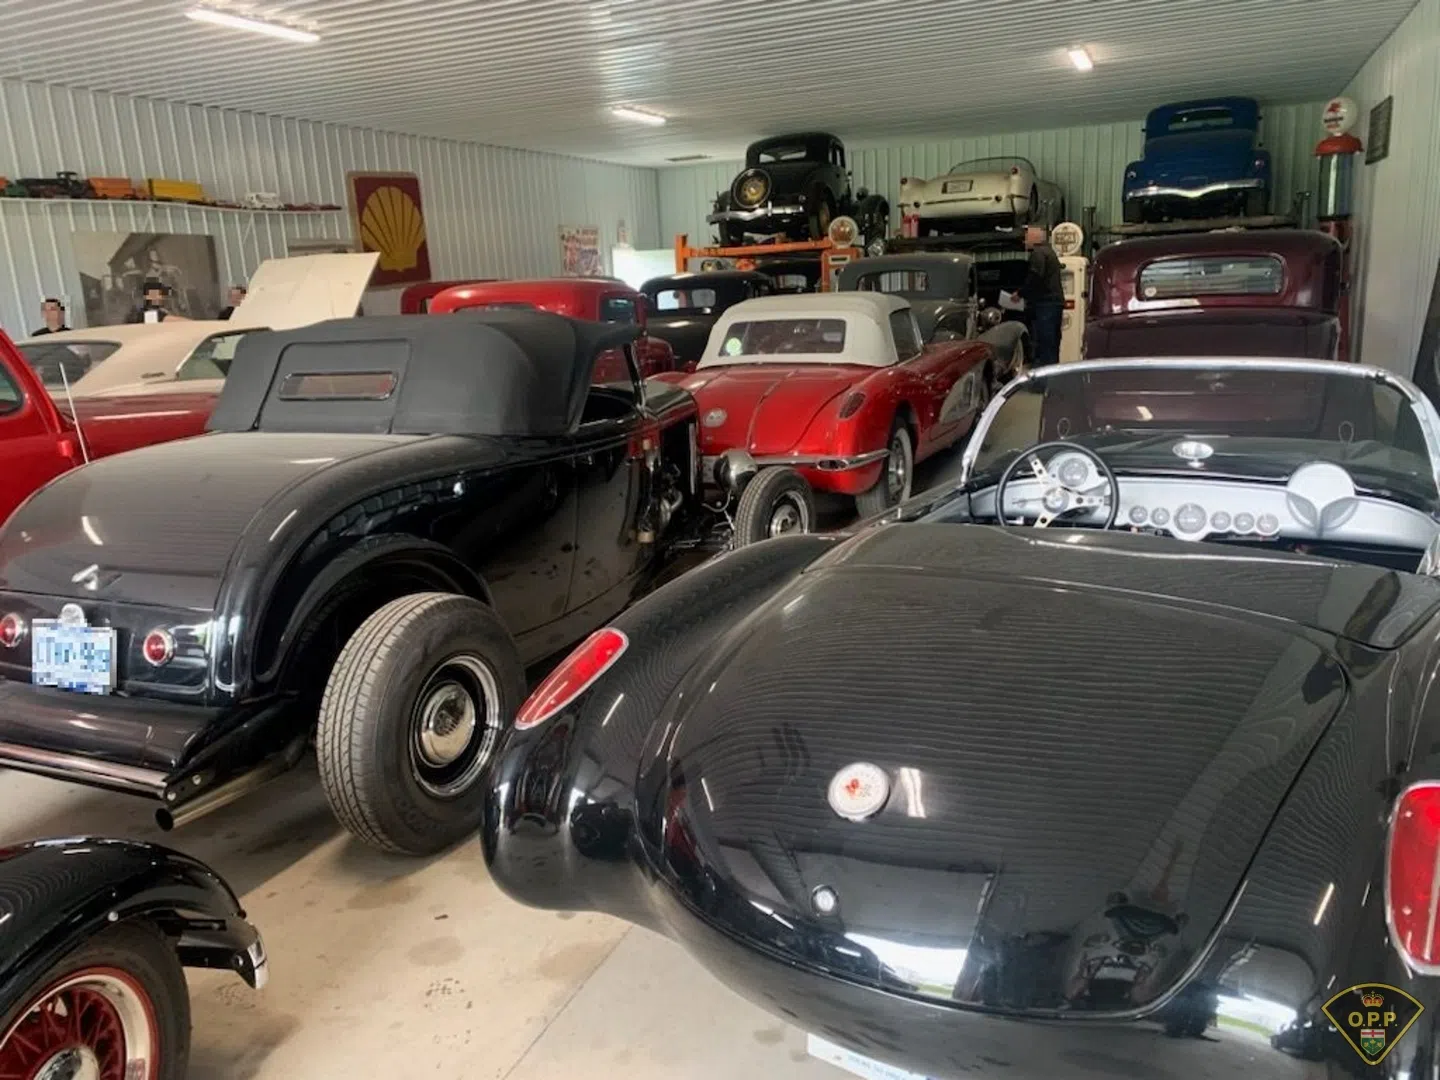 Classic cars among stolen vehicles located in Stirling